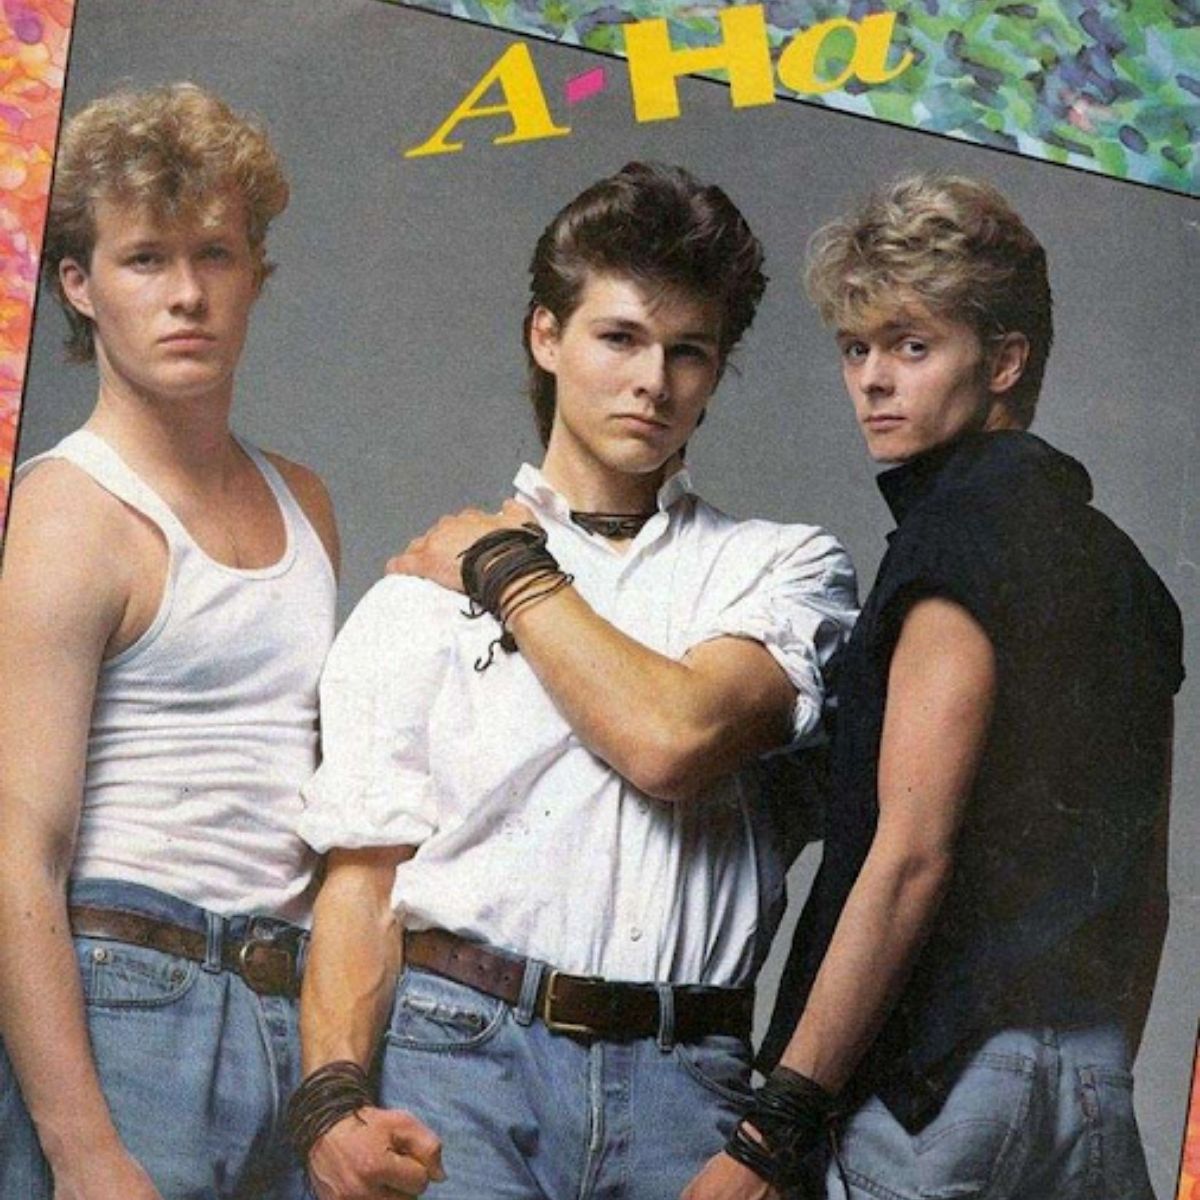 Members of the group "A-ha" in their youth